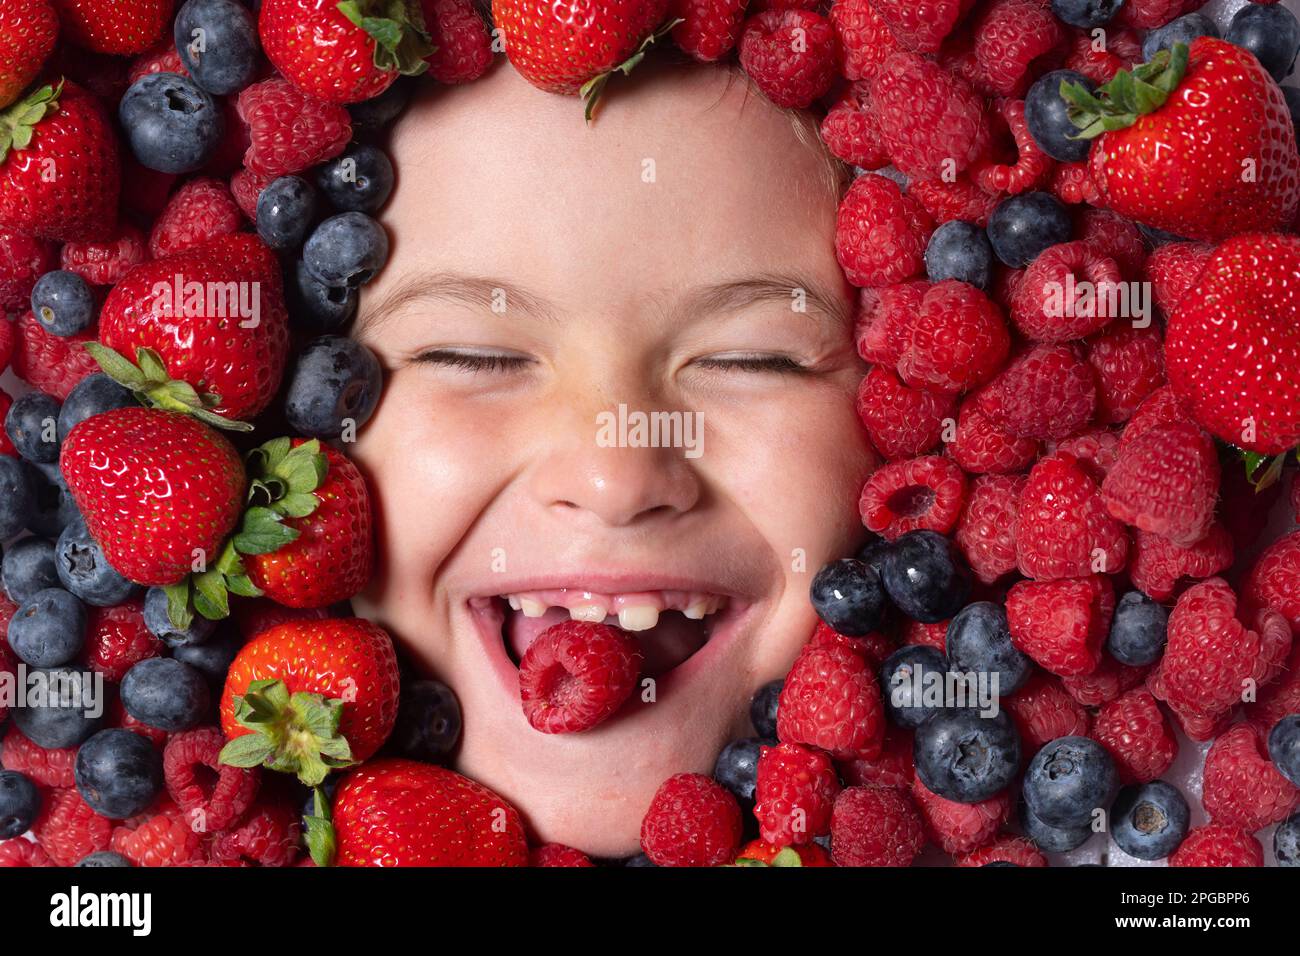 Healthy vitamins fruits. Mix of strawberry, blueberry, raspberry, blackberry background. Berries close up near kids face. Fresh berries, top view. Mix Stock Photo